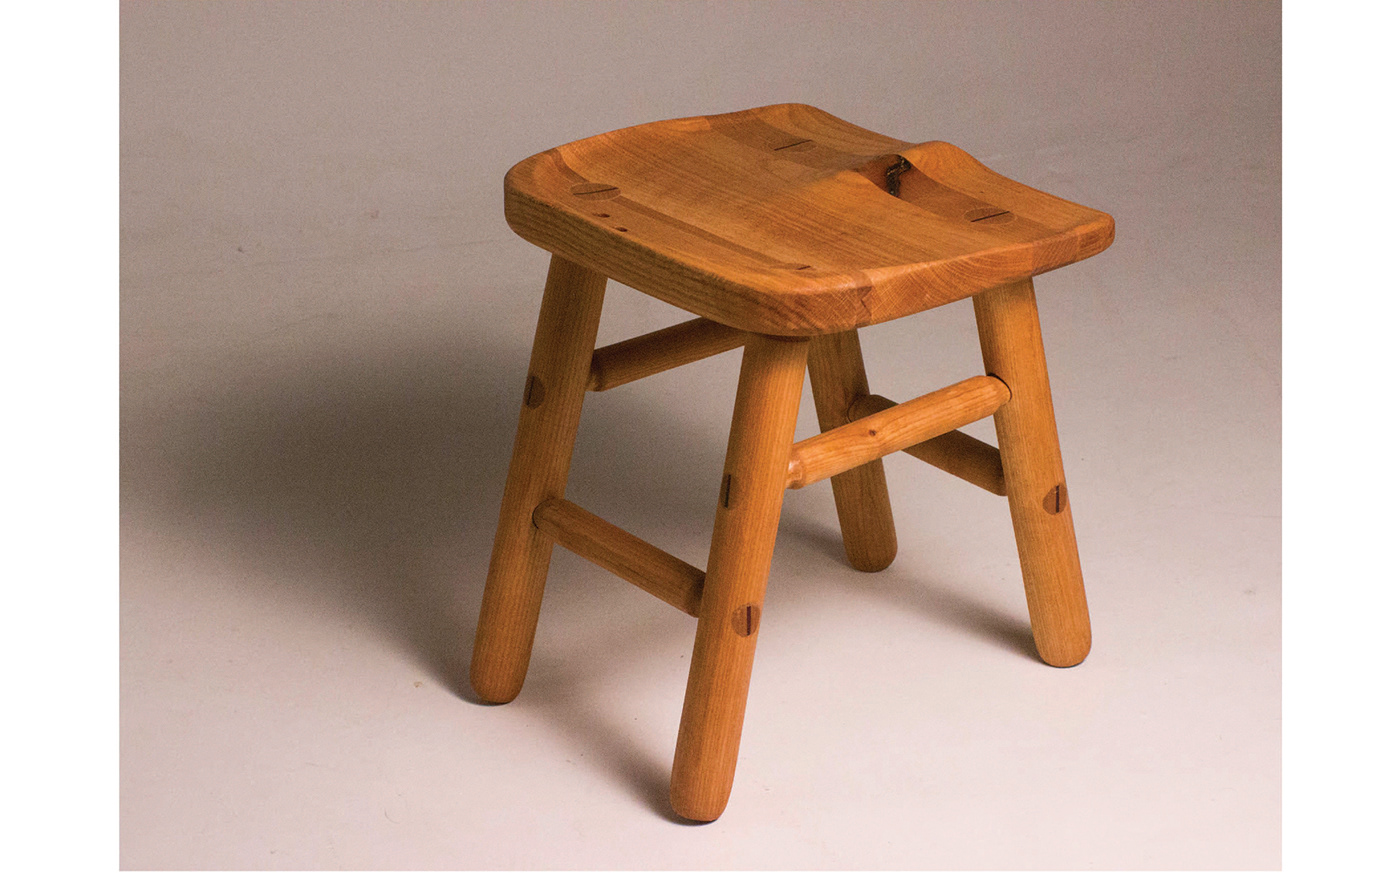 woodworking design product design  stool seating Photography  art furniture jeremy allan quality moments